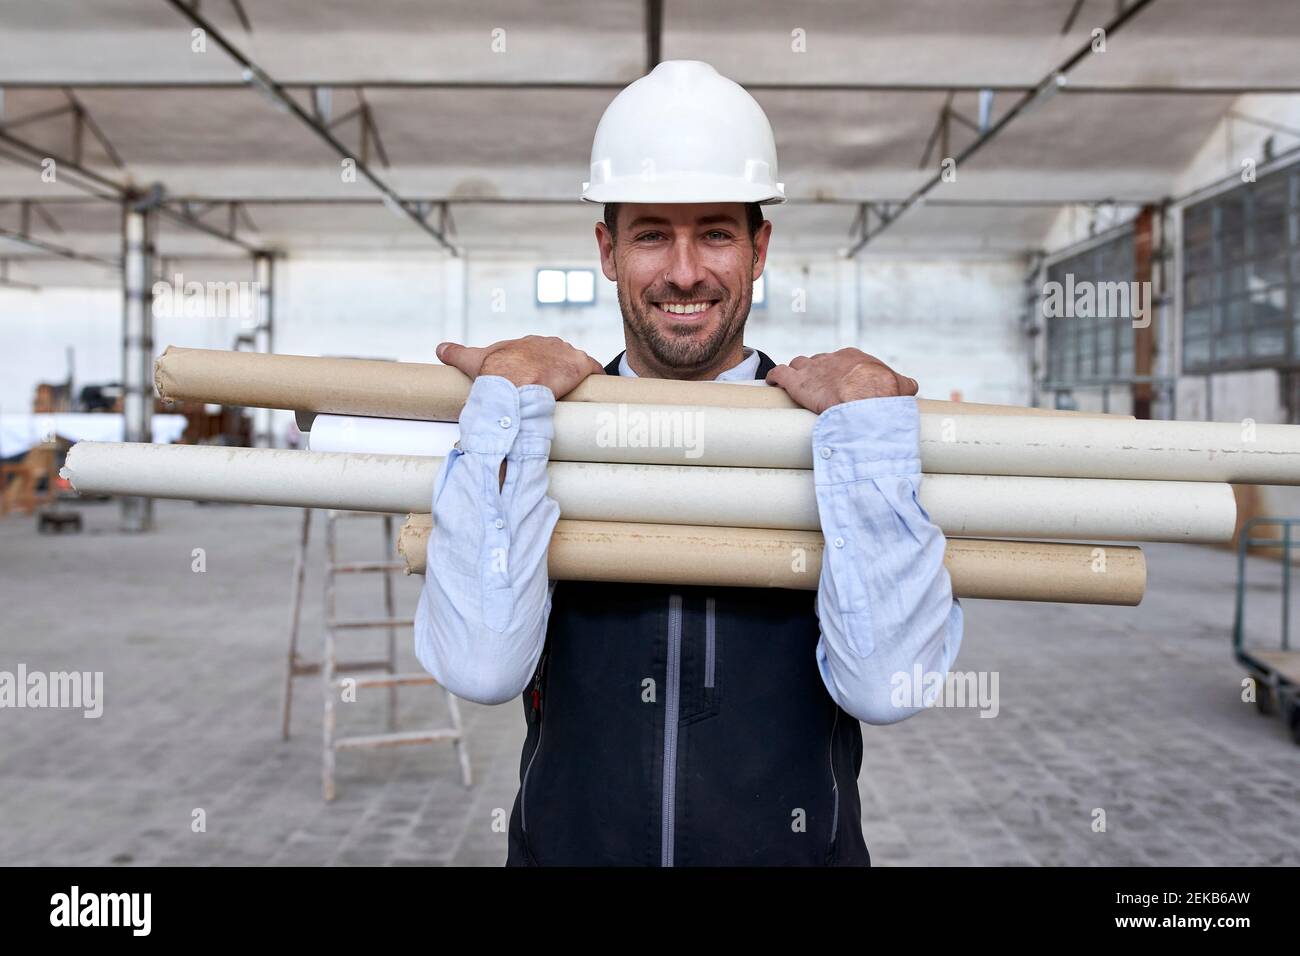 Smiling male architect holding cardboards while standing in building Stock Photo